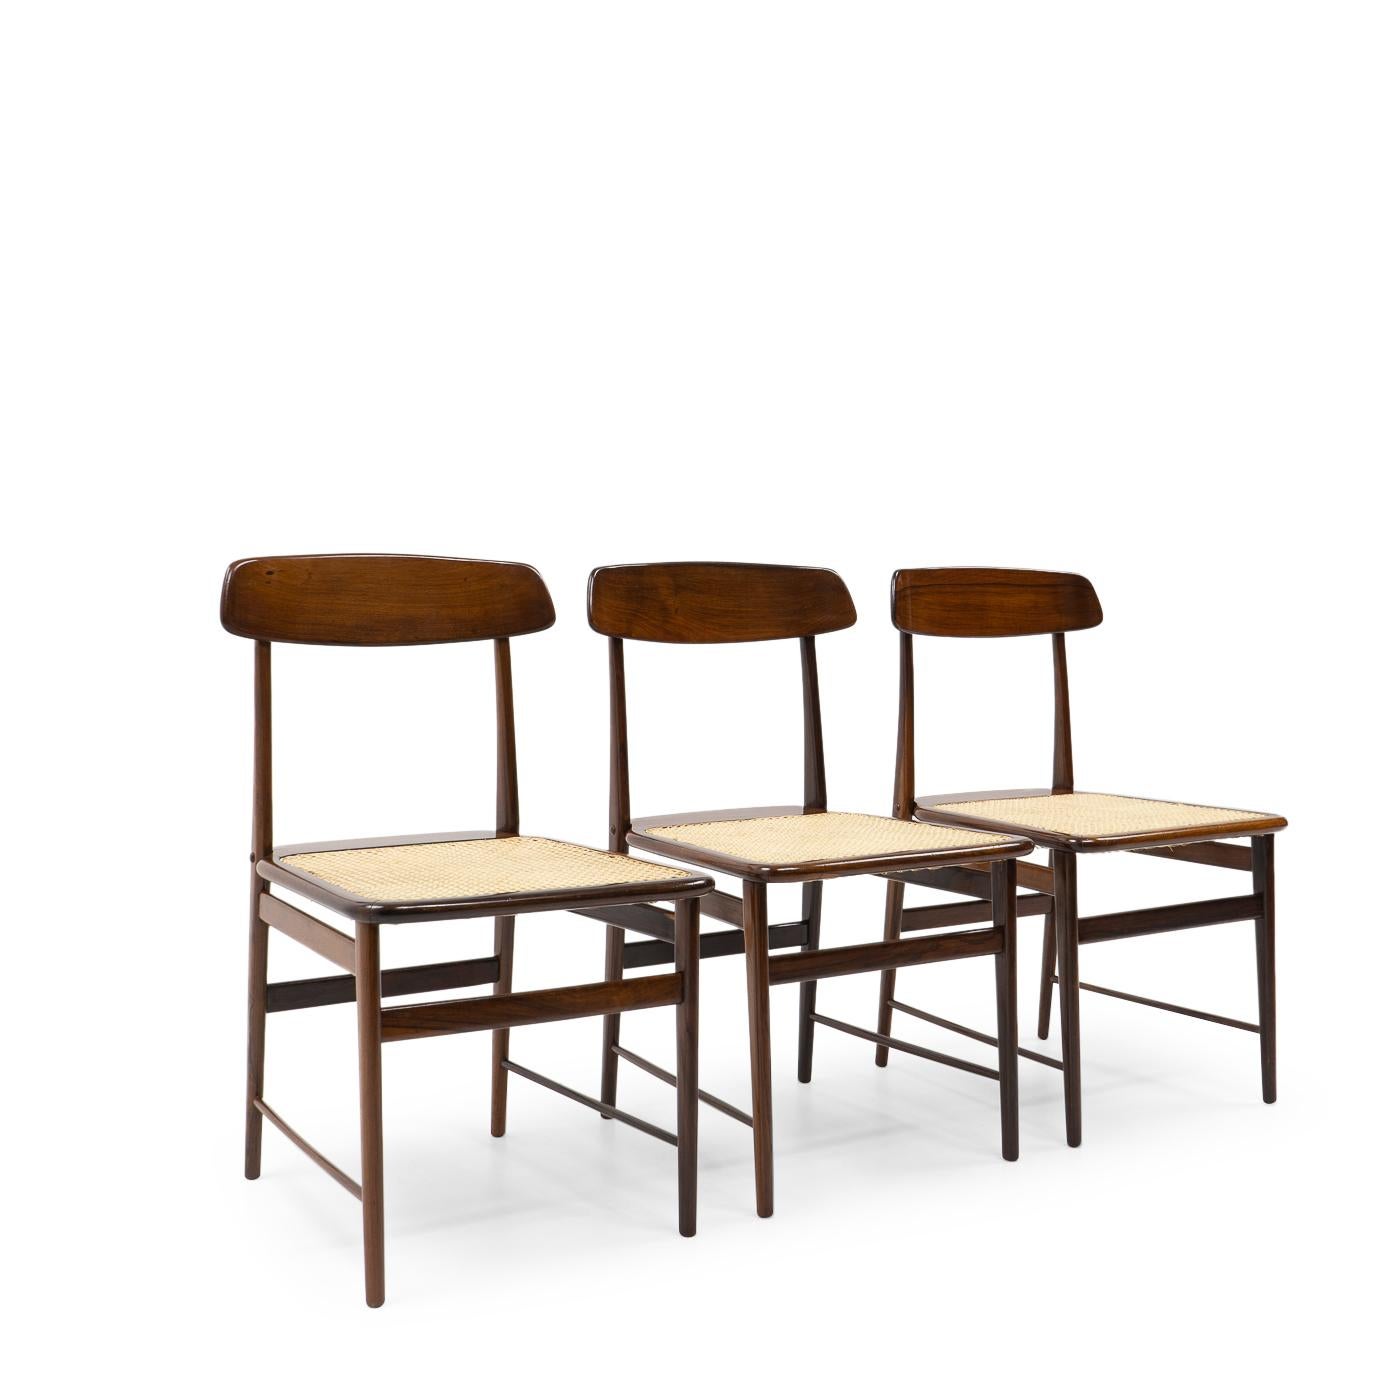 Sergio Rodrigues set the standard for Modern furniture in Brazil during the 1950s. His works have become a reference for Brazilian design, which often use indigenous wood species such as jacaranda and imbuia.

One of his most iconic designs is the